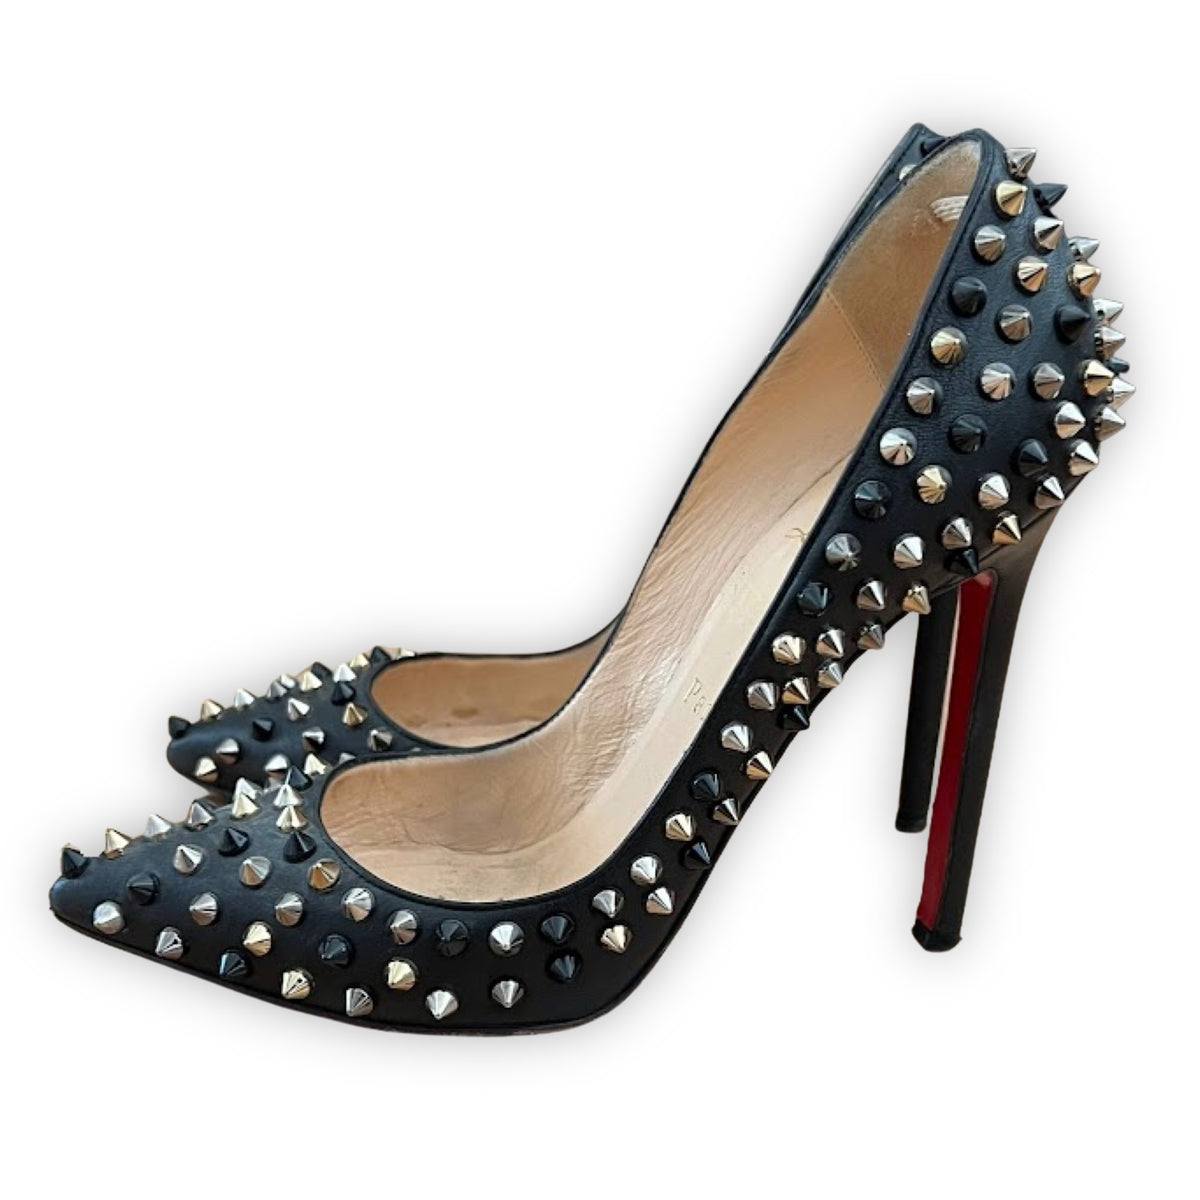 CHRISTIAN LOUBOUTIN Black Pigalle Studded Pumps | Size 36.5